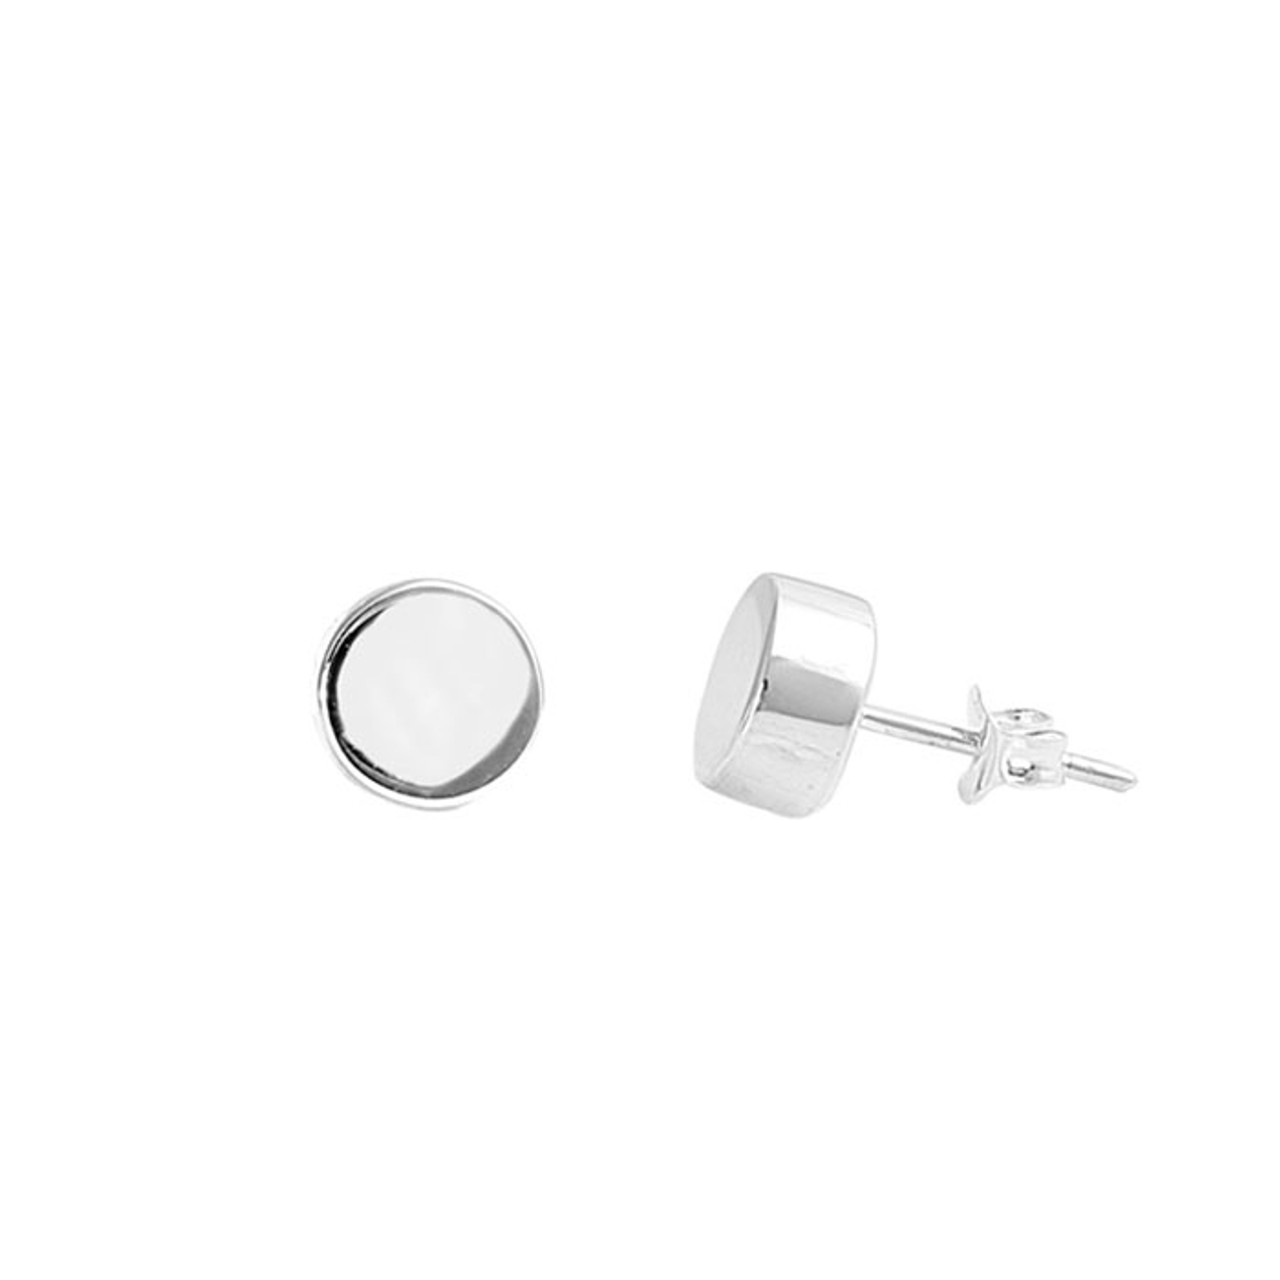 ROUND AND FLAT SILVER STUD EARRINGS 